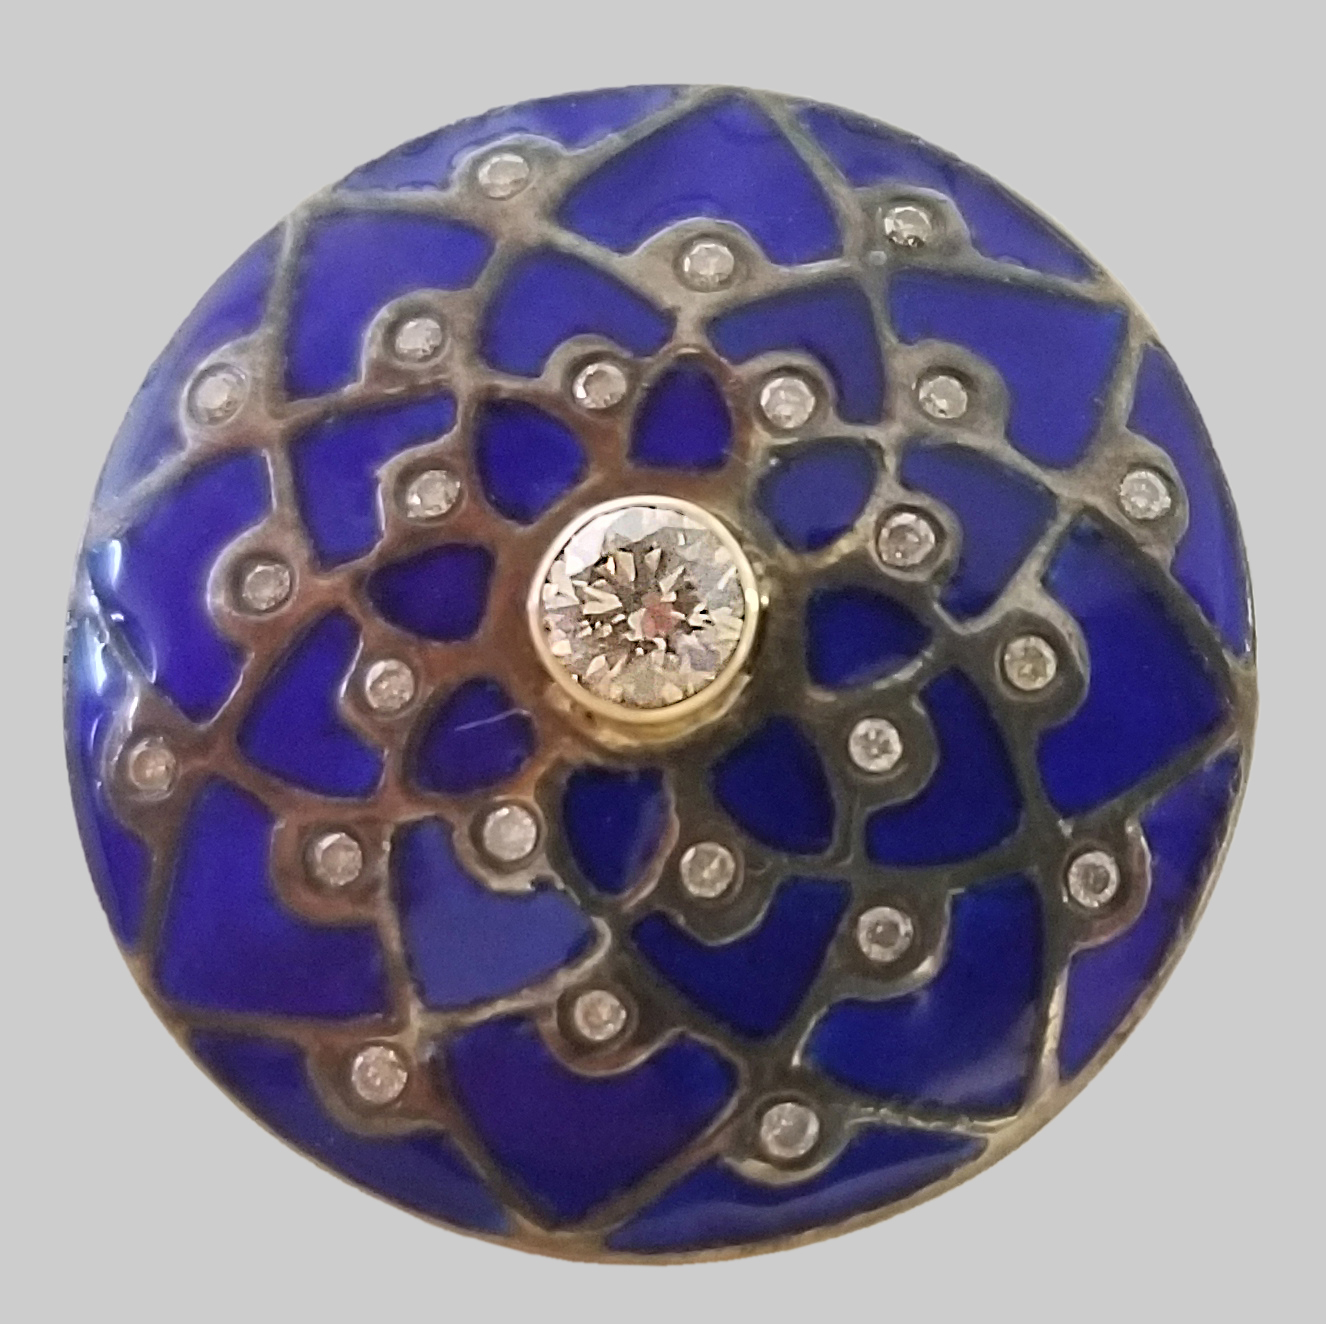 Fig. 7b - Unknown maker, Buttons with flower heads, 1880-1920, sterling silver, gold, diamonds, enamel, TRRF Collection.